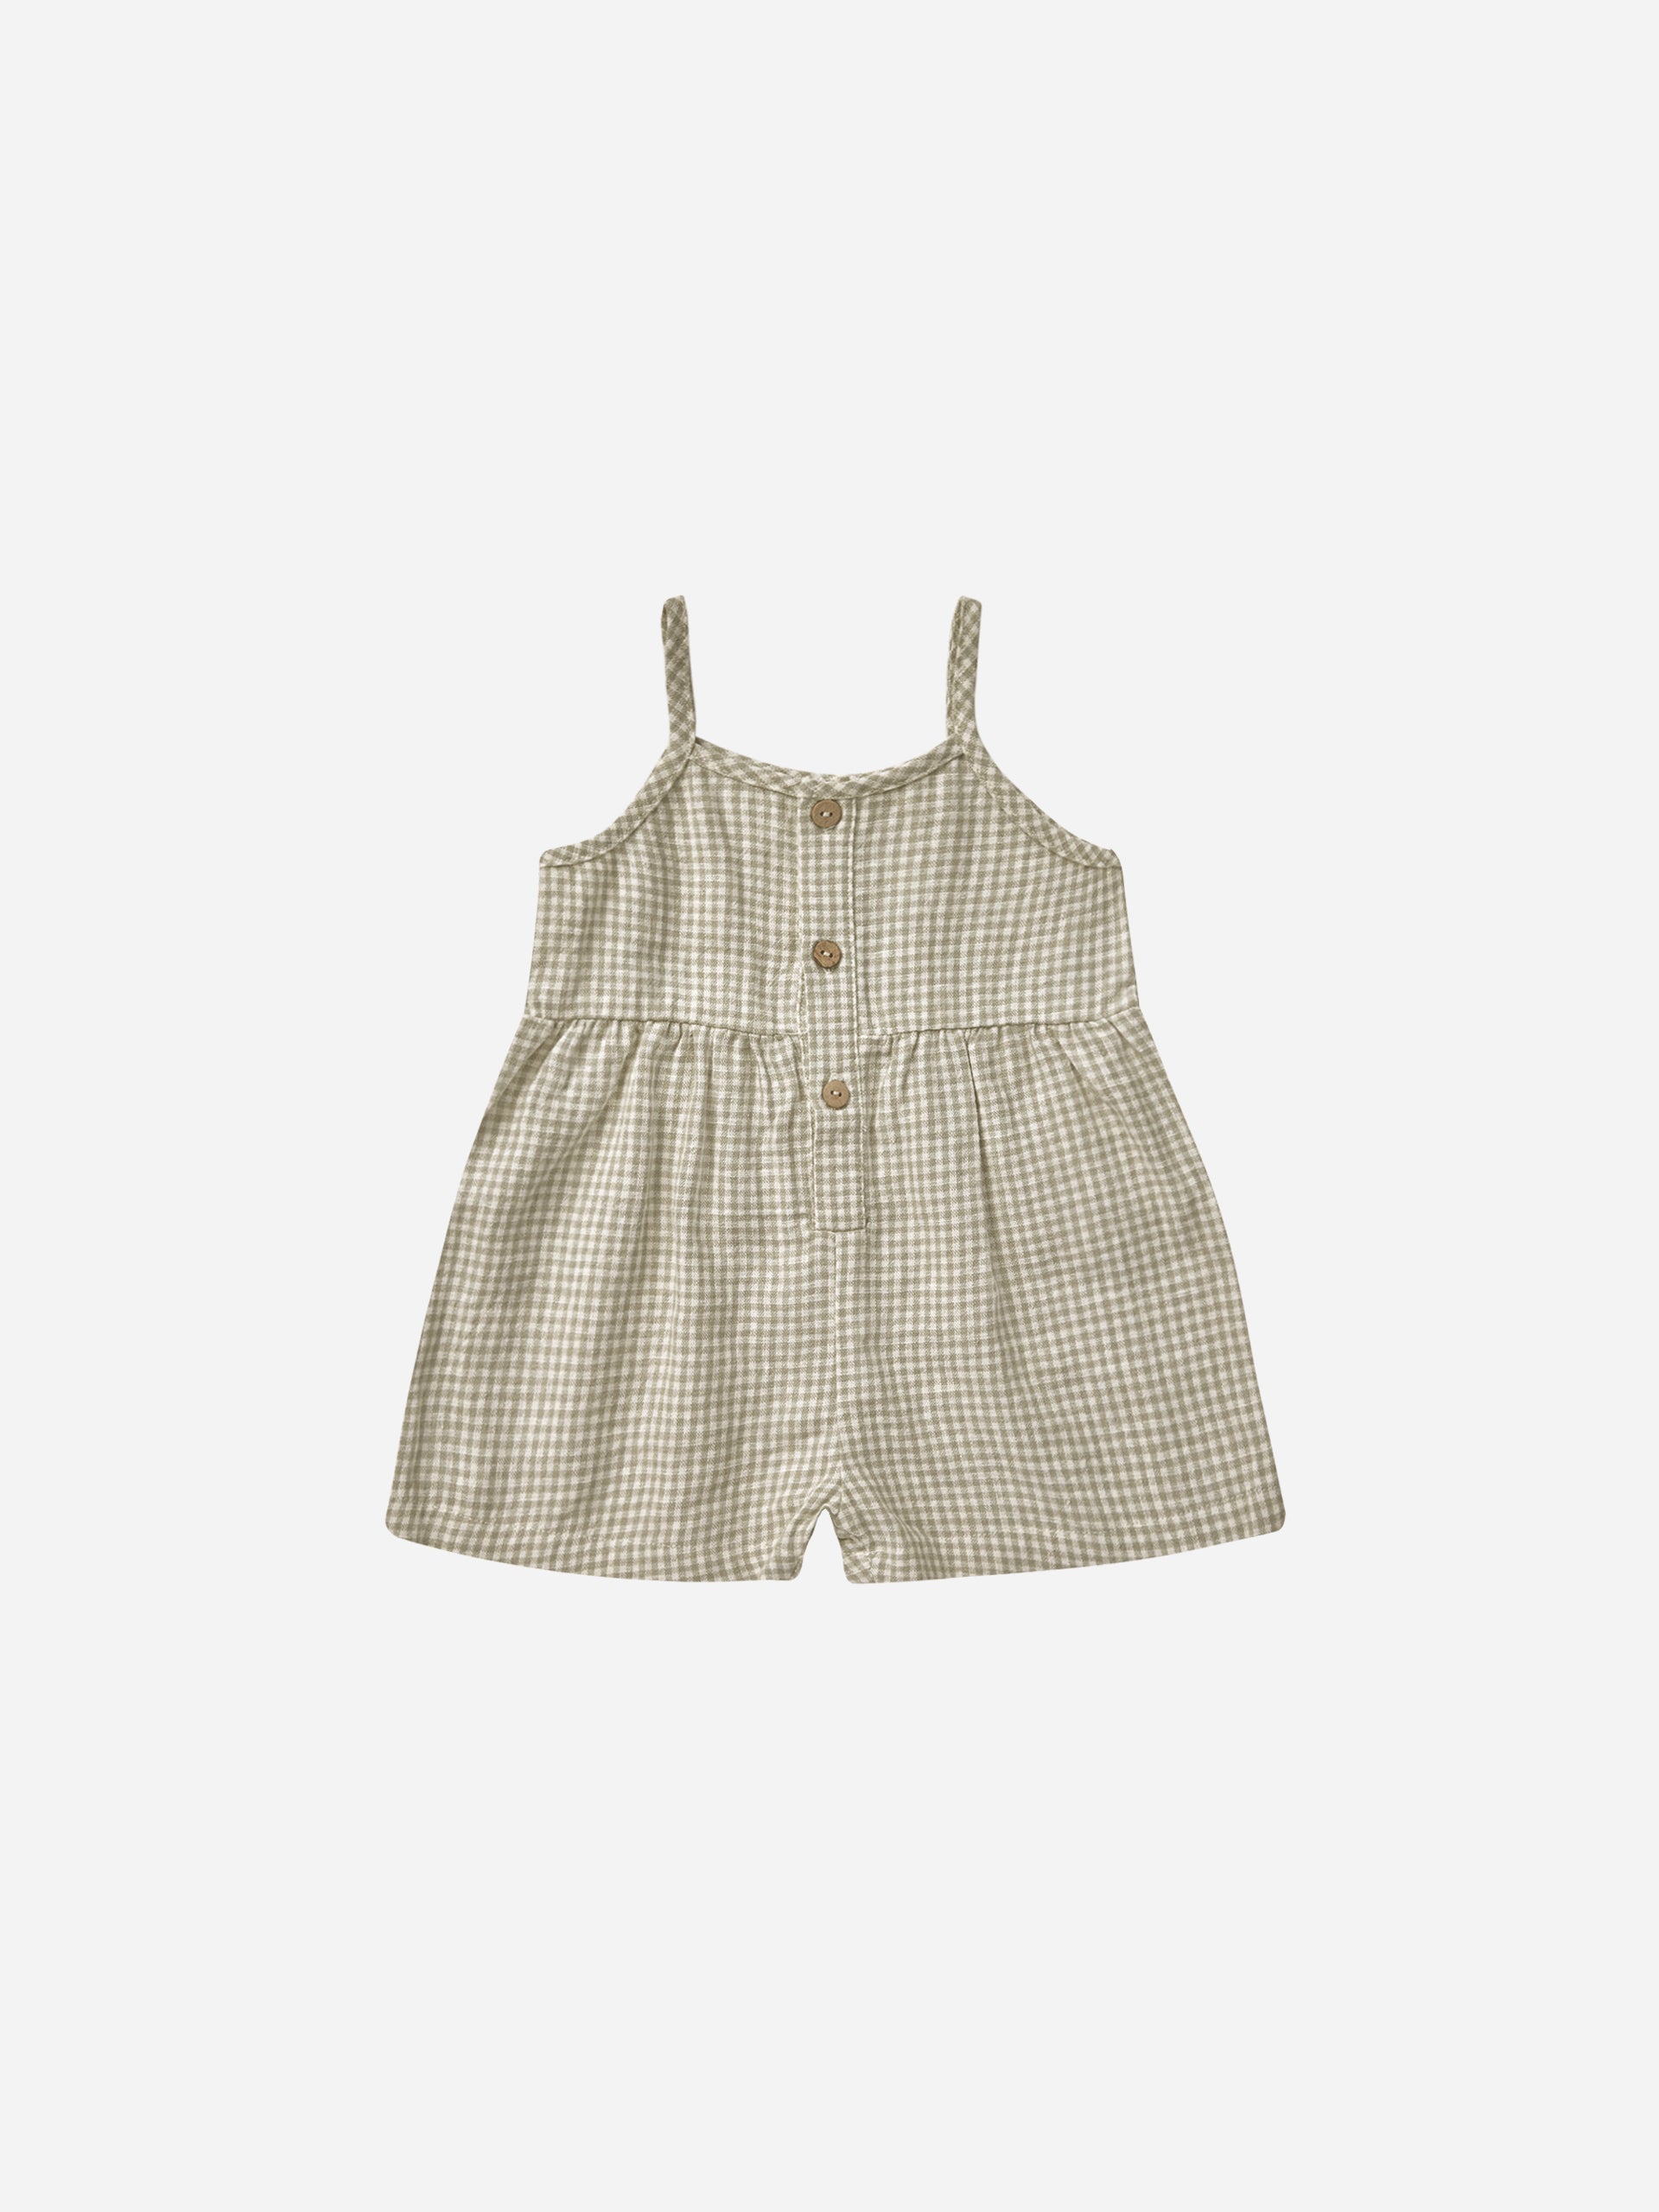 Button Romper || Sage Gingham - Rylee + Cru | Kids Clothes | Trendy Baby Clothes | Modern Infant Outfits |